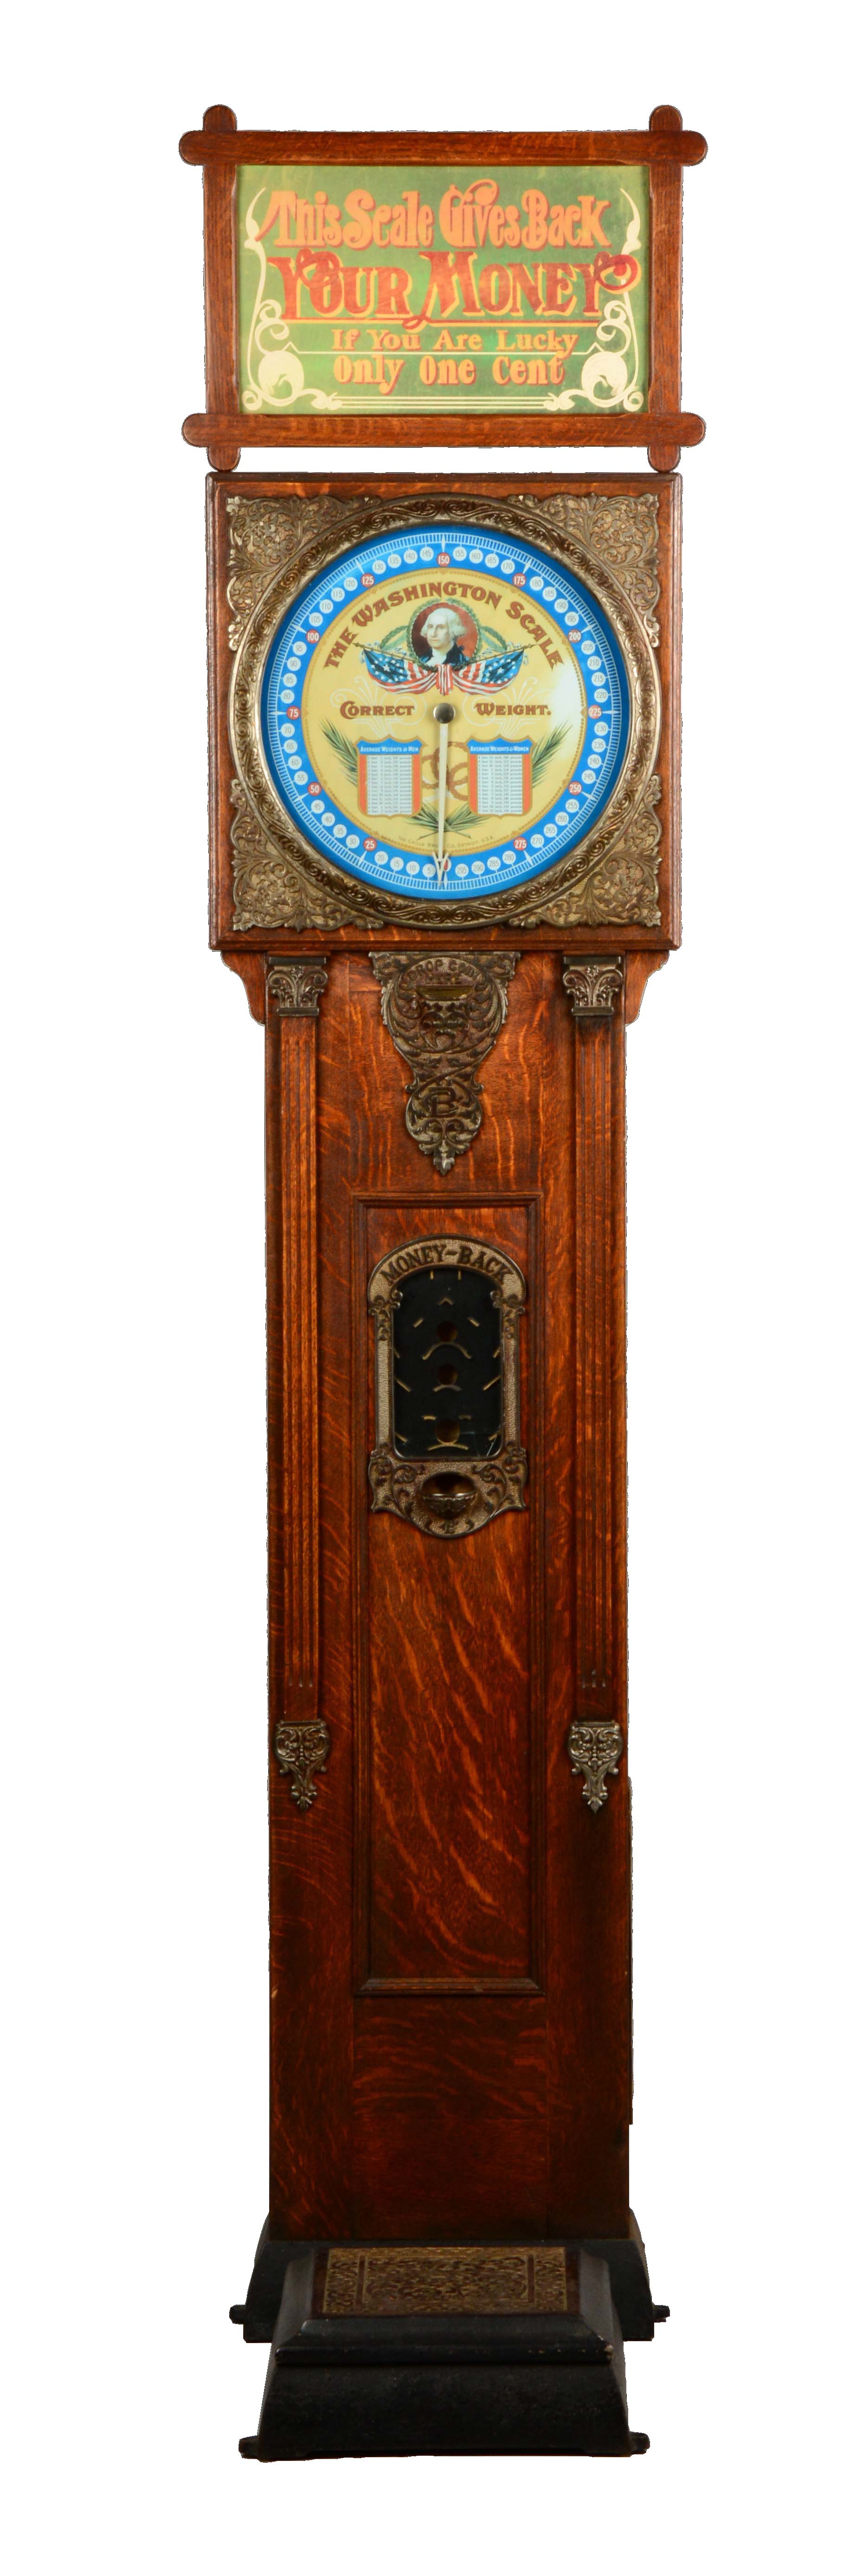 1¢ Caille Bros. George Washington Floor Scale, estimated at $15,000-20,000.